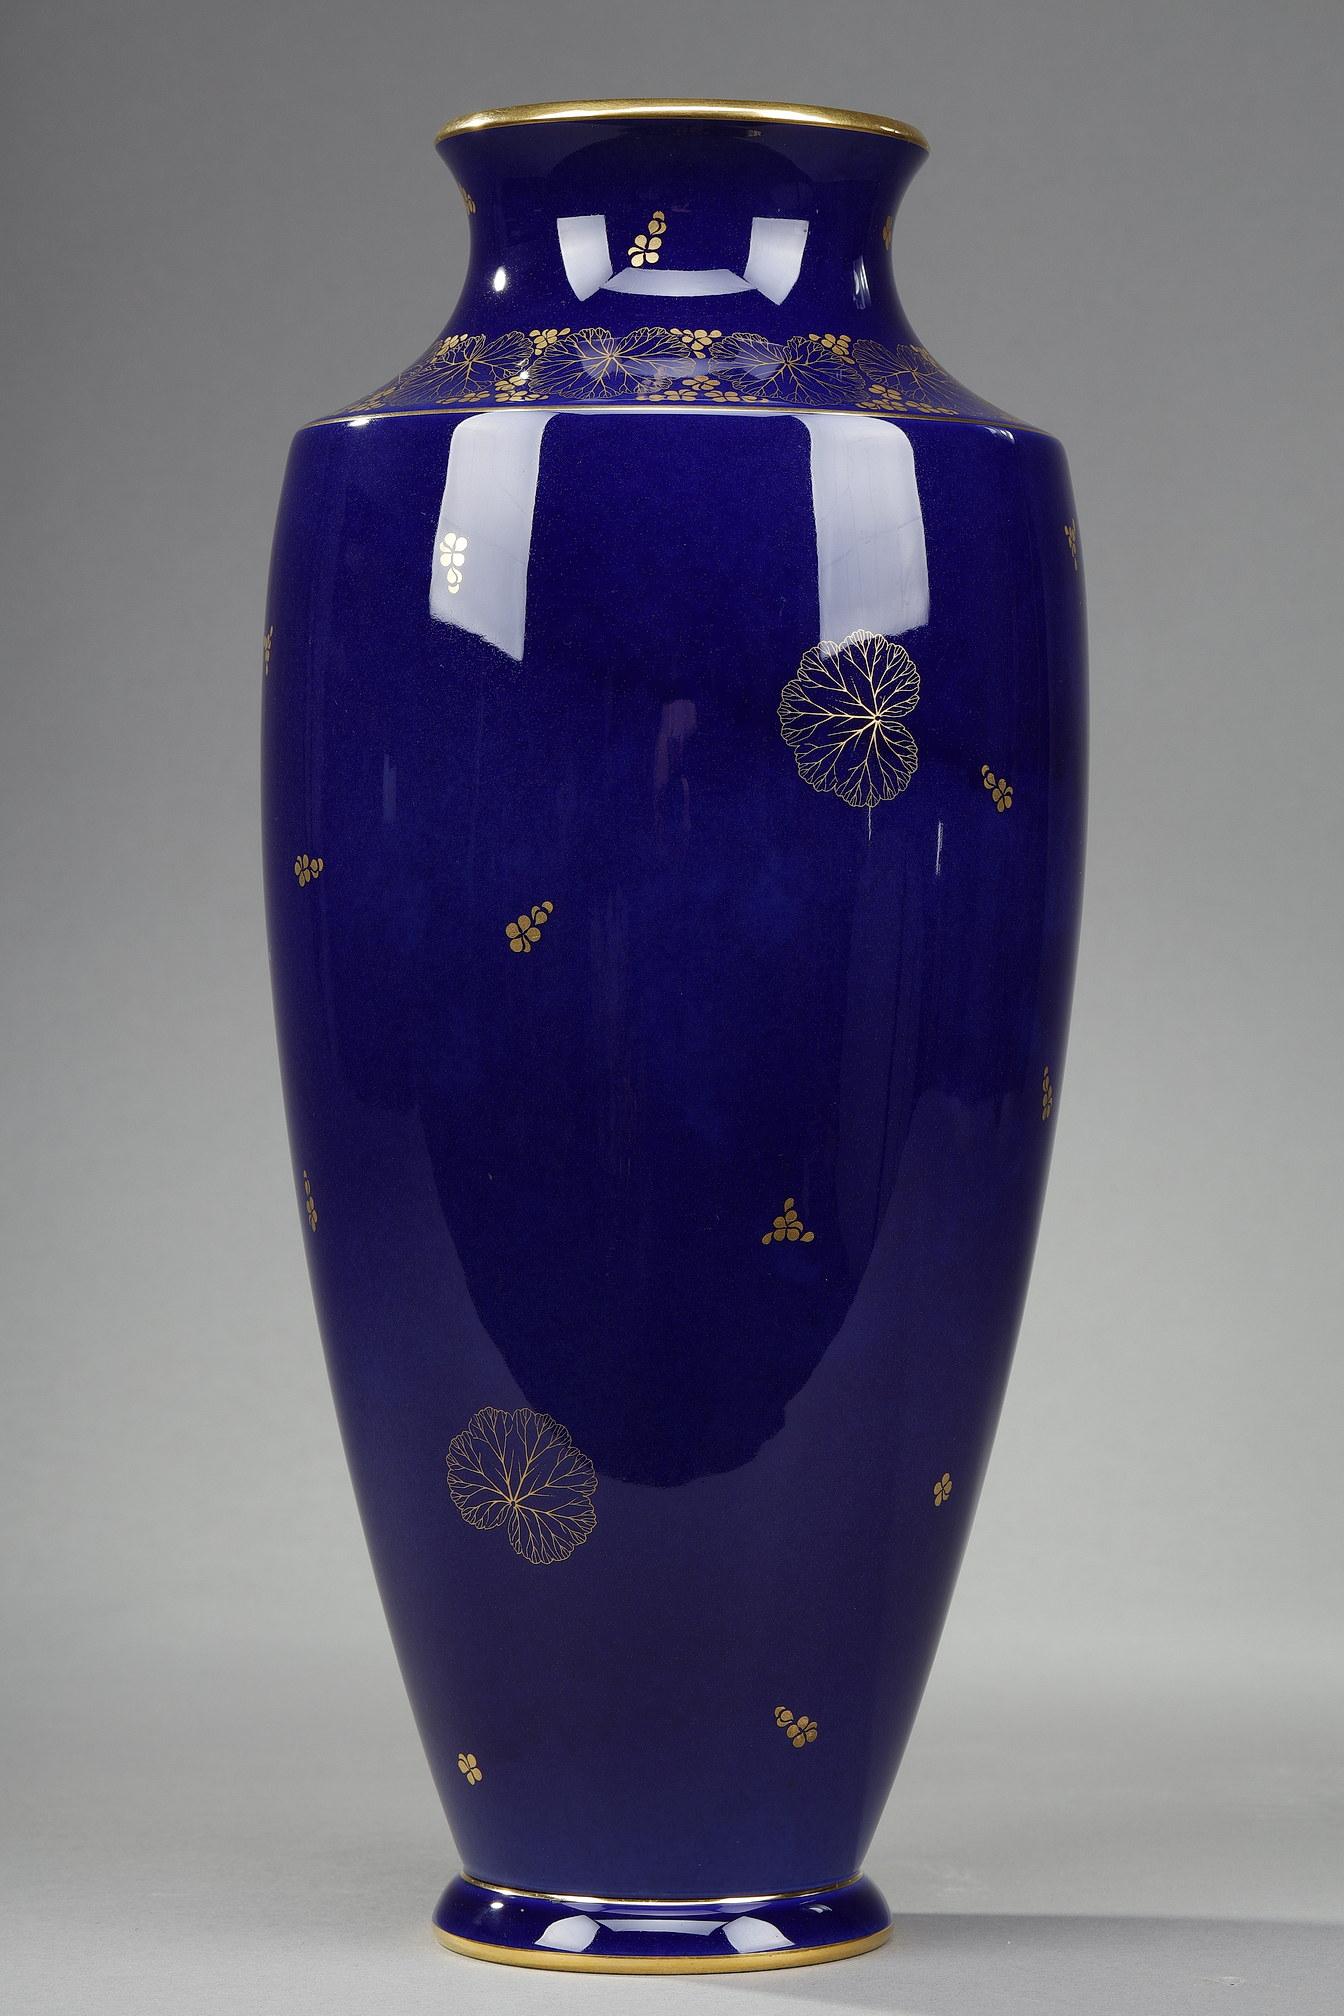 Vase baluster from the Sèvres manufacture in Porcelain iridescent night blue with gold highlights of stylised leaf motifs. It is decorated with a 